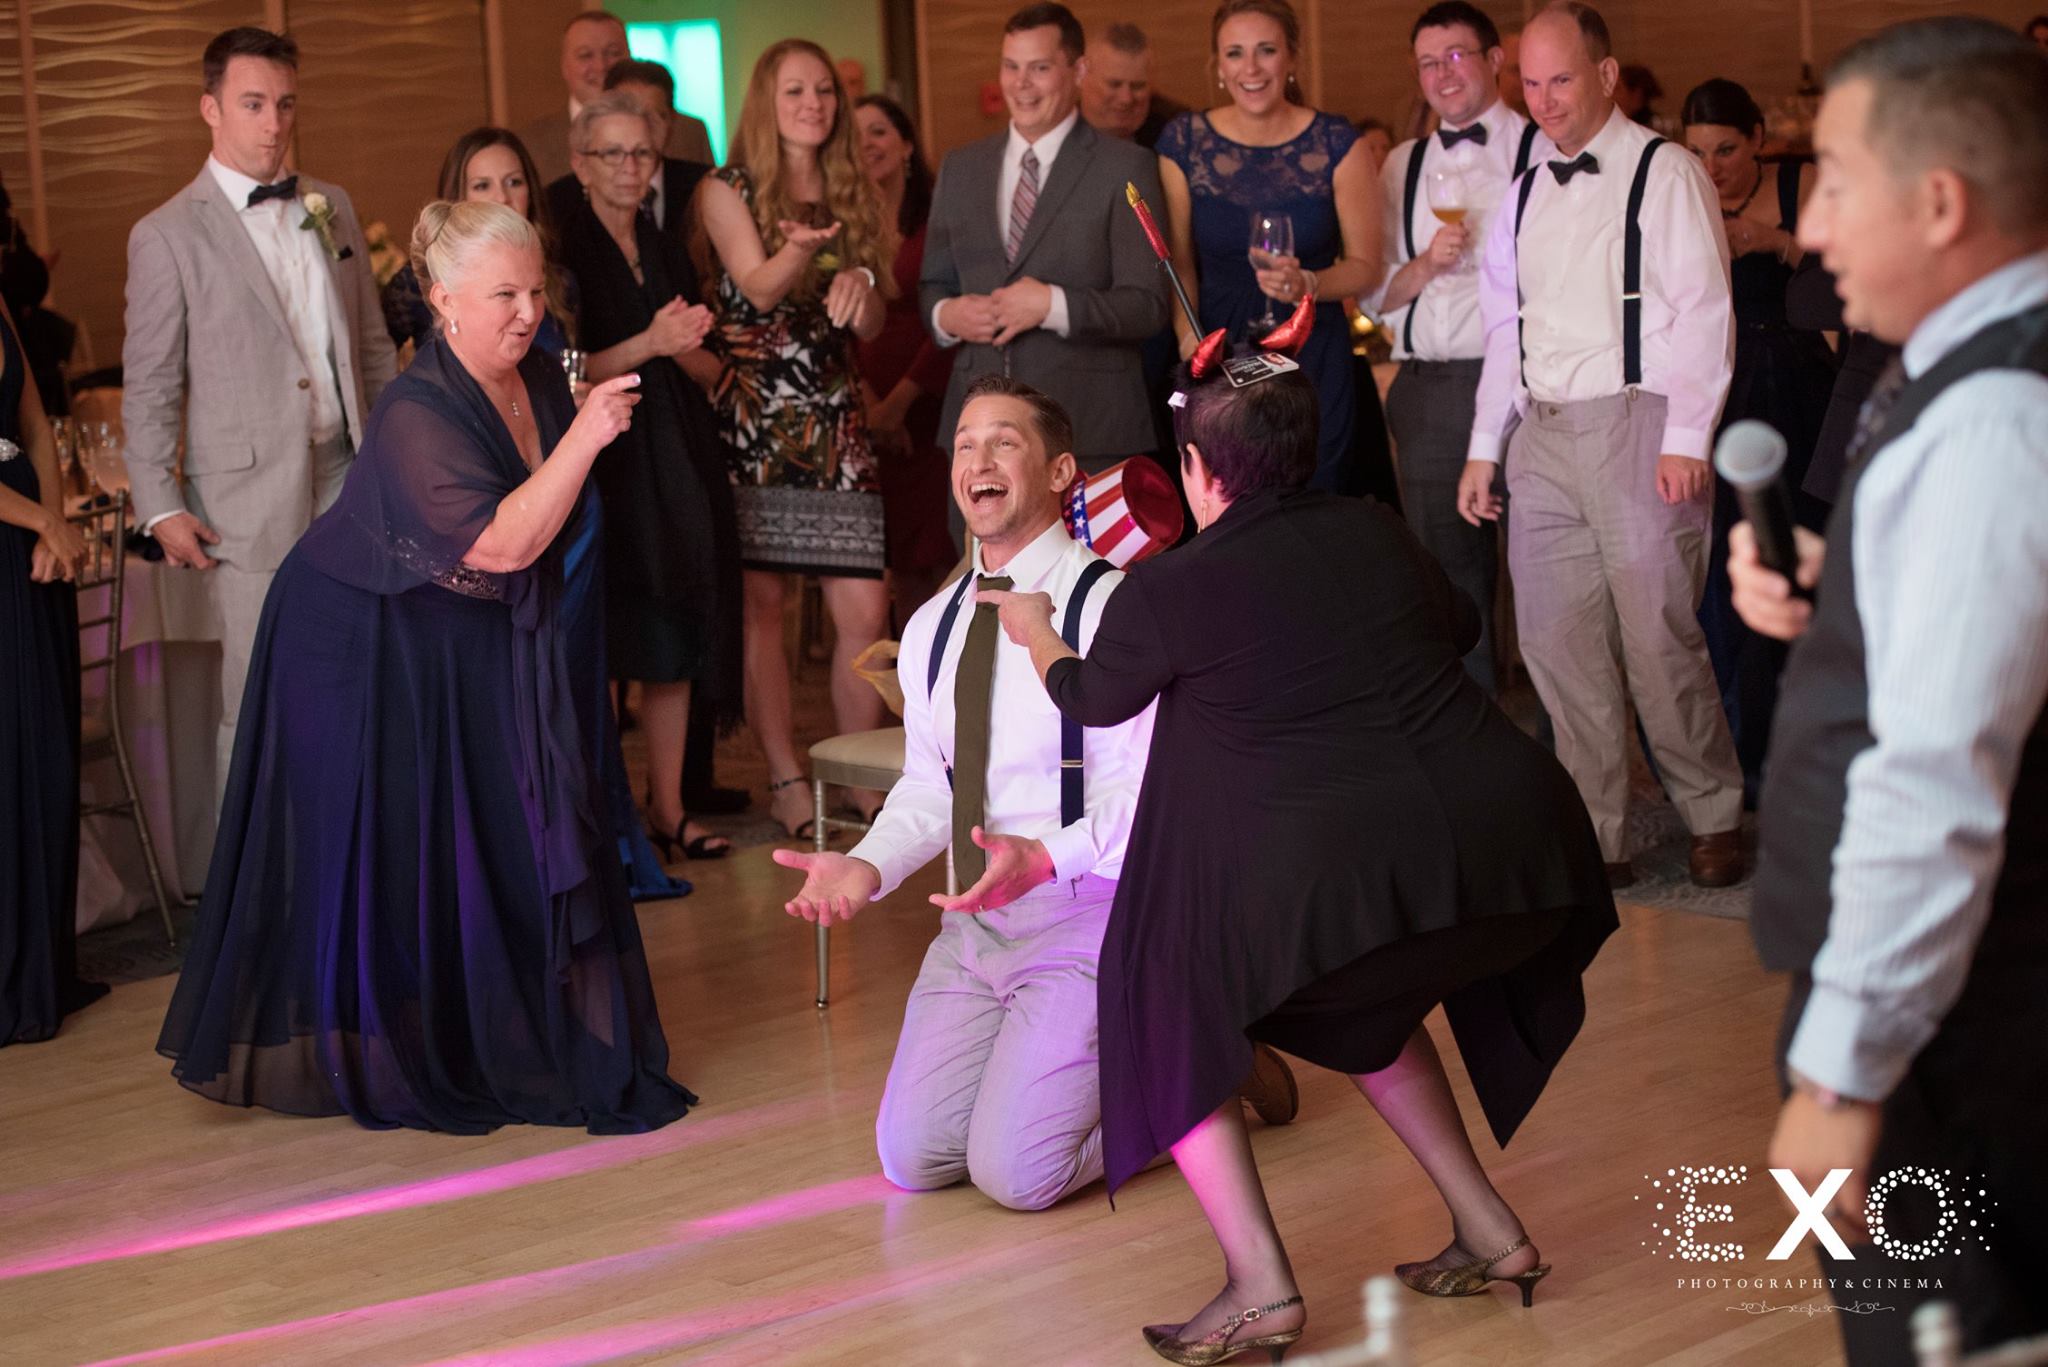 groom and family at reception on dancefloor